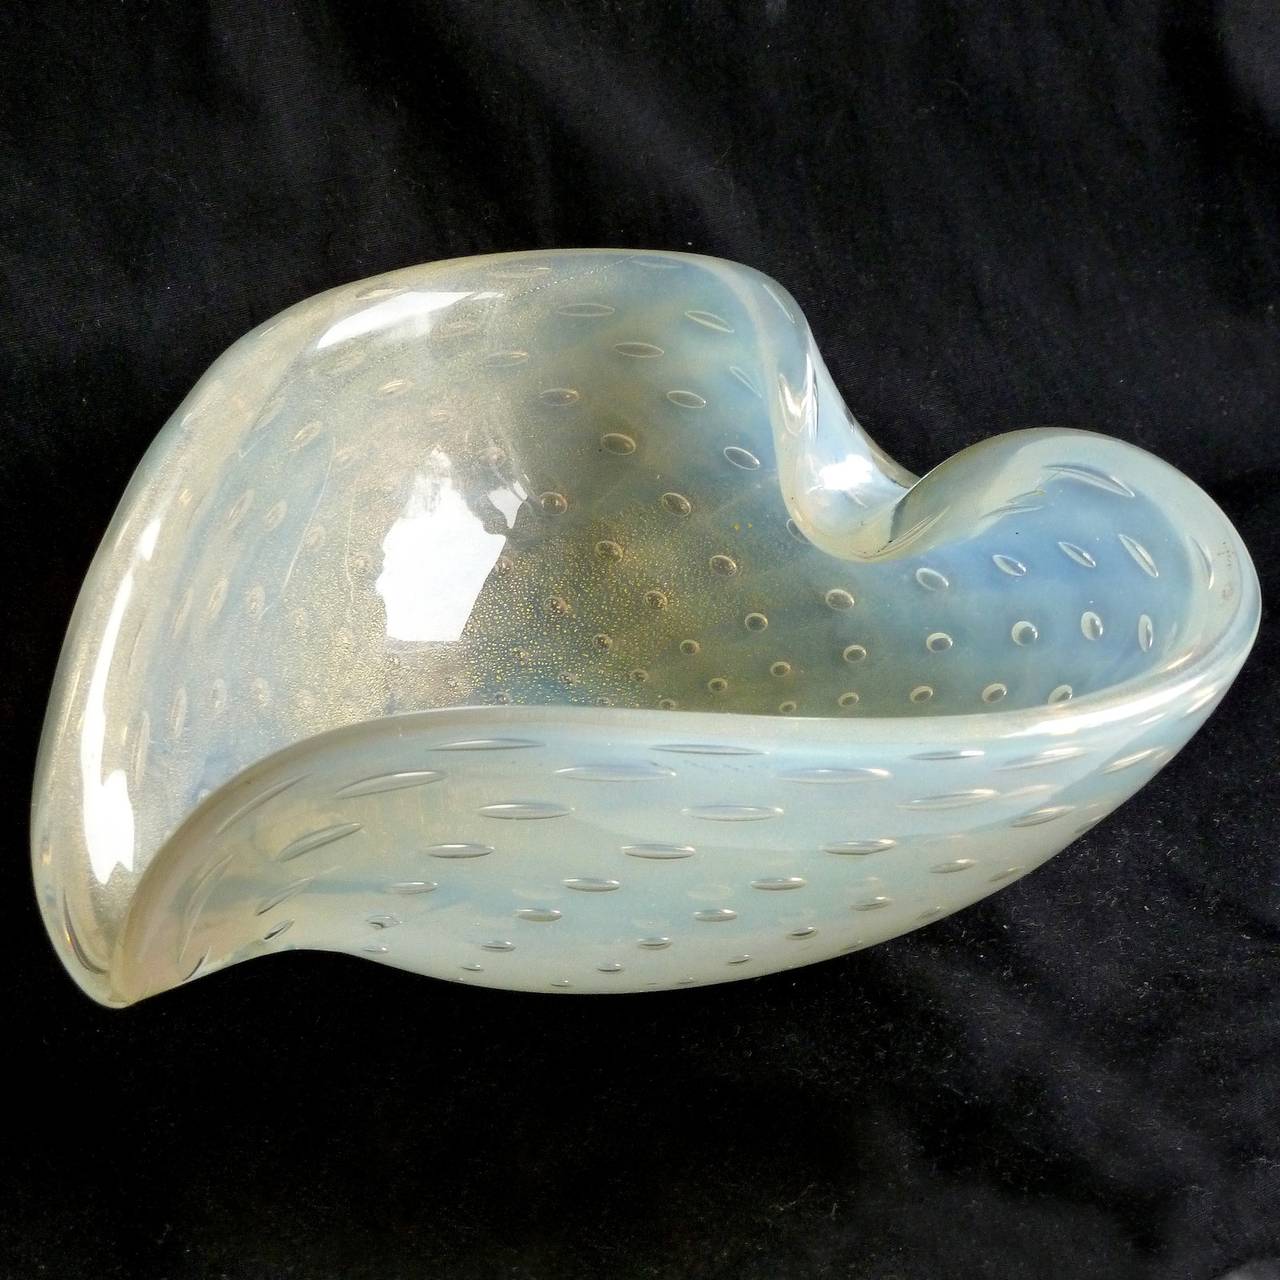 FREE Shipping Worldwide! See details below description.

Elegant Murano Hand Blown White Opalescent, Controlled Bubbles and Gold Flecks Art Glass Heart Shape Bowl. Created in the manner of designers Archimede Seguso and Alfredo Barbini. Fairly